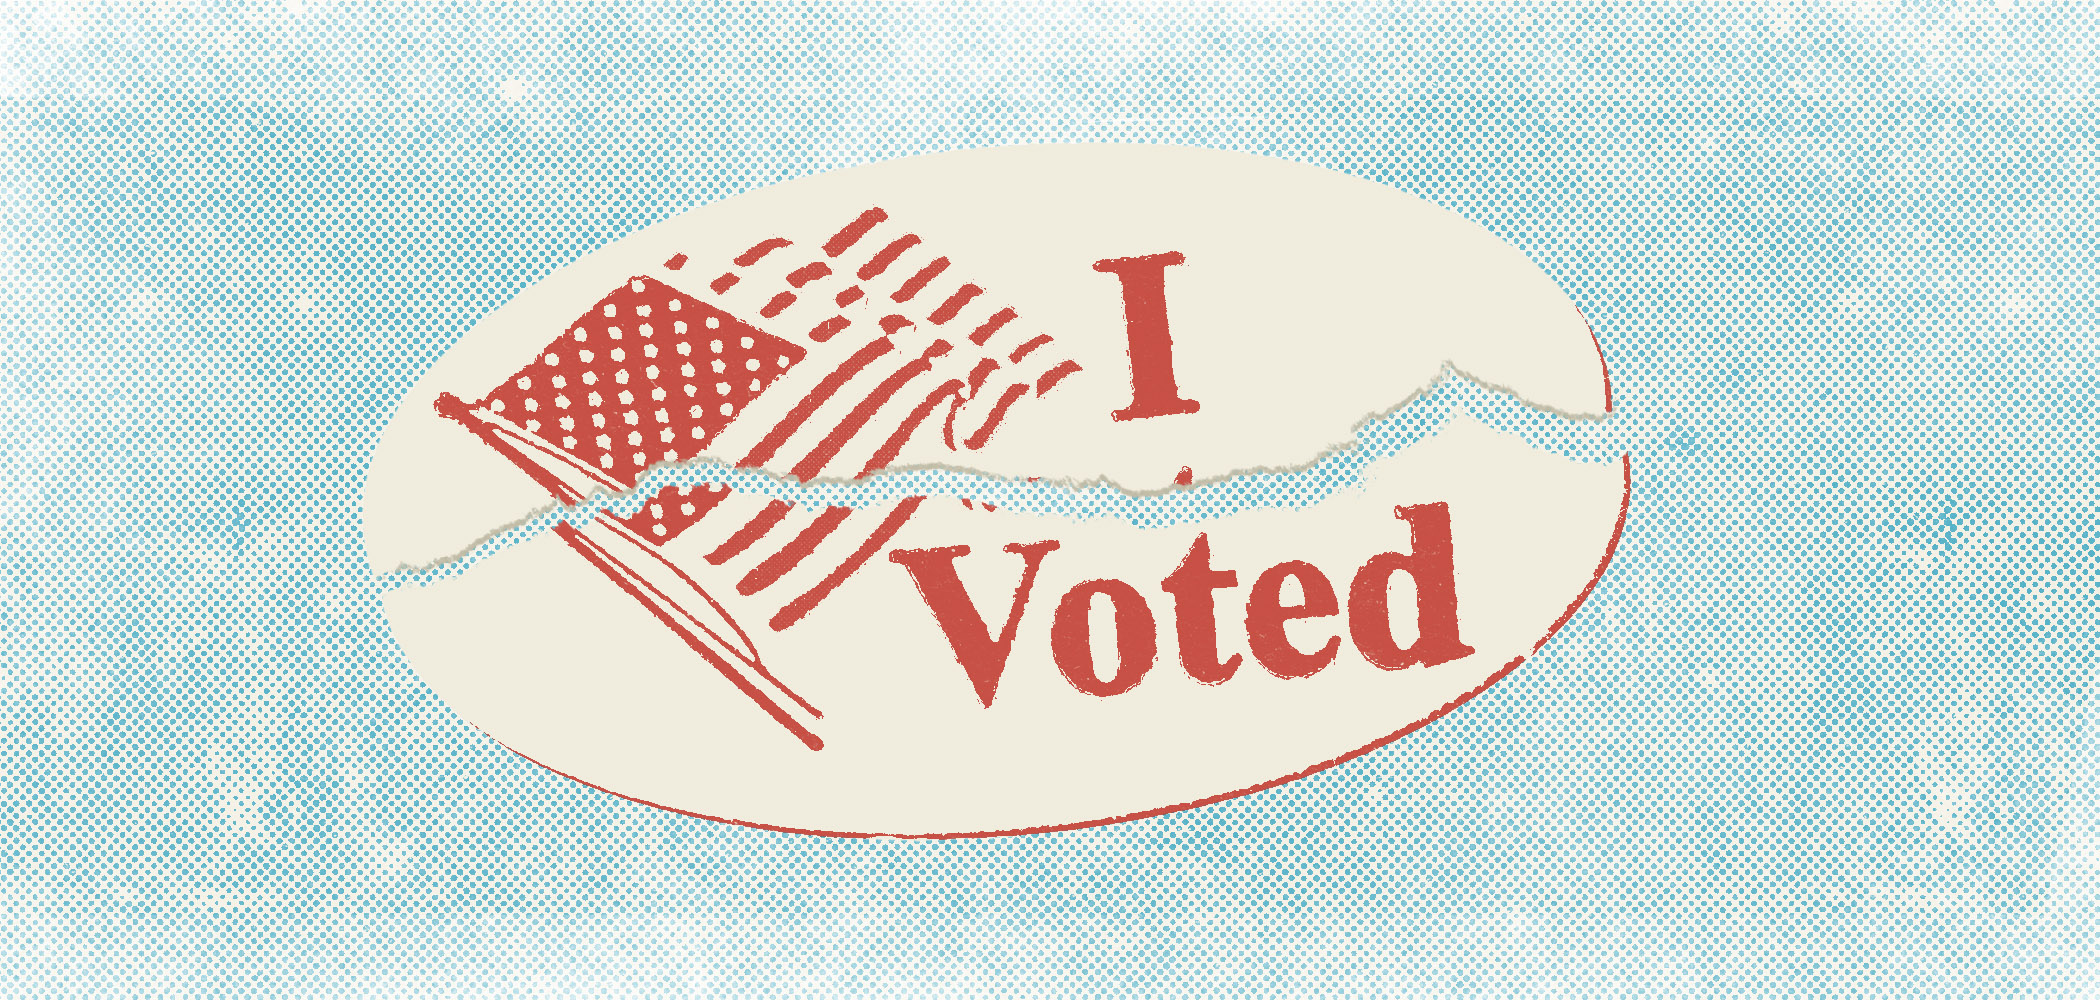 A torn "I Voted" sticker set in red on a blue halftone dotted background.